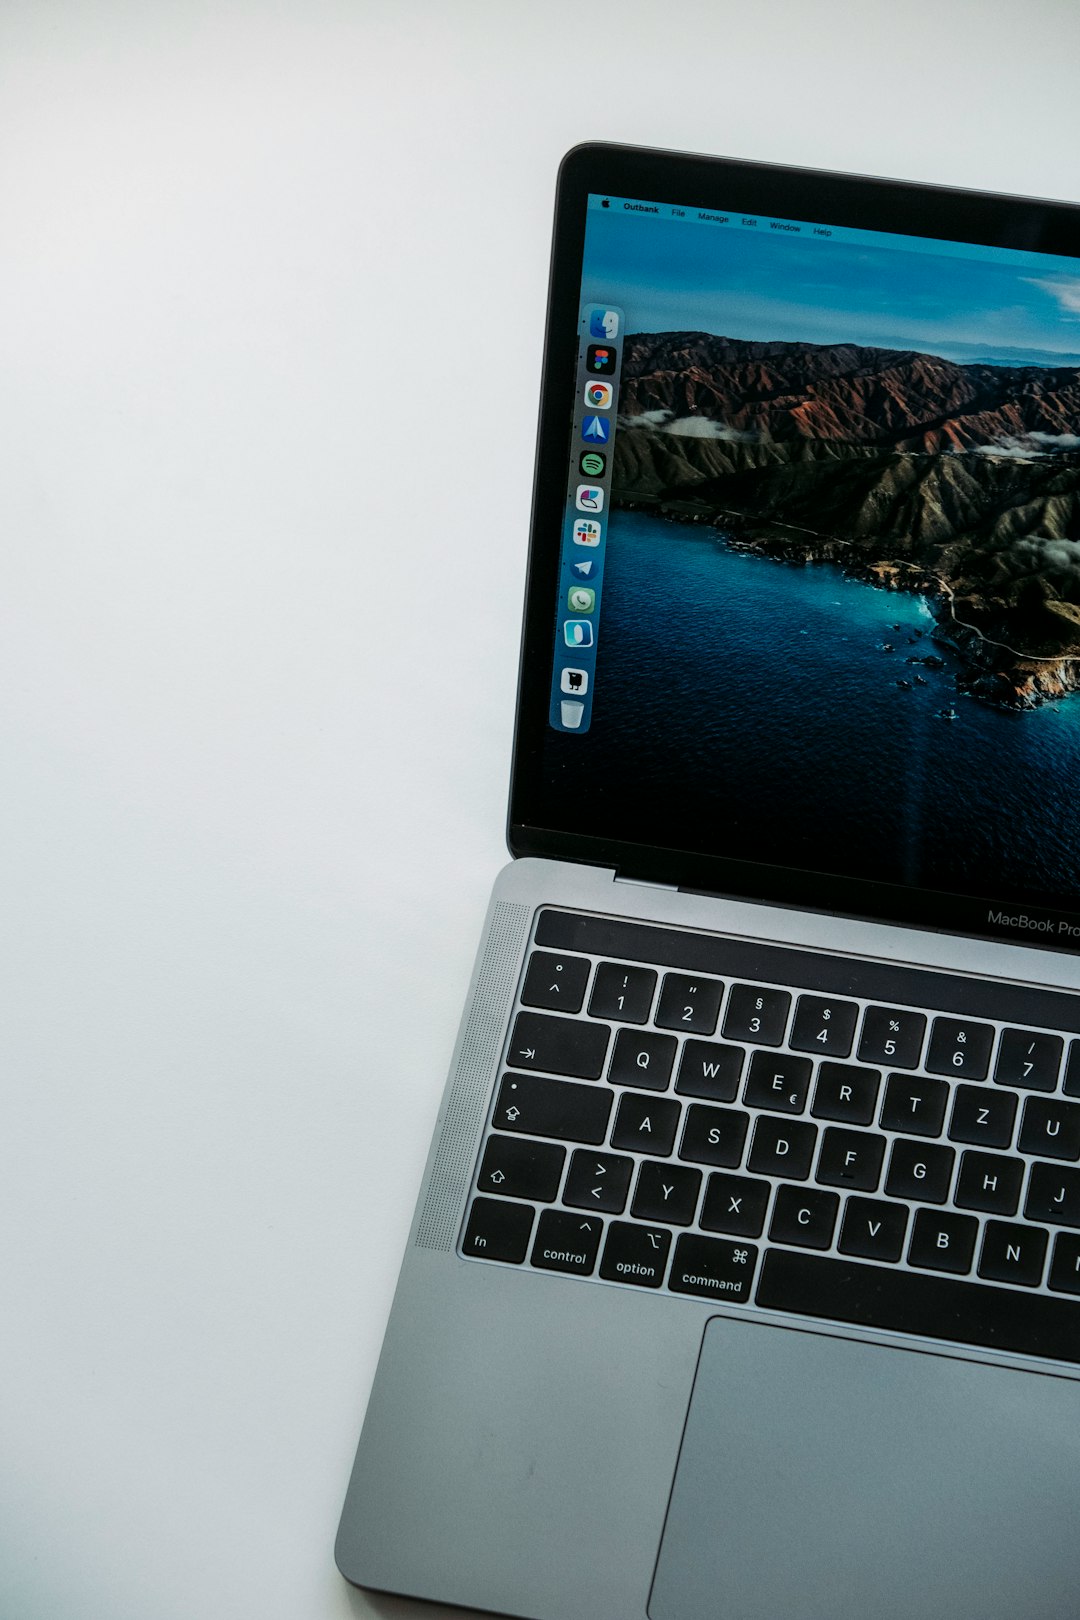 macbook pro displaying blue and white wallpaper